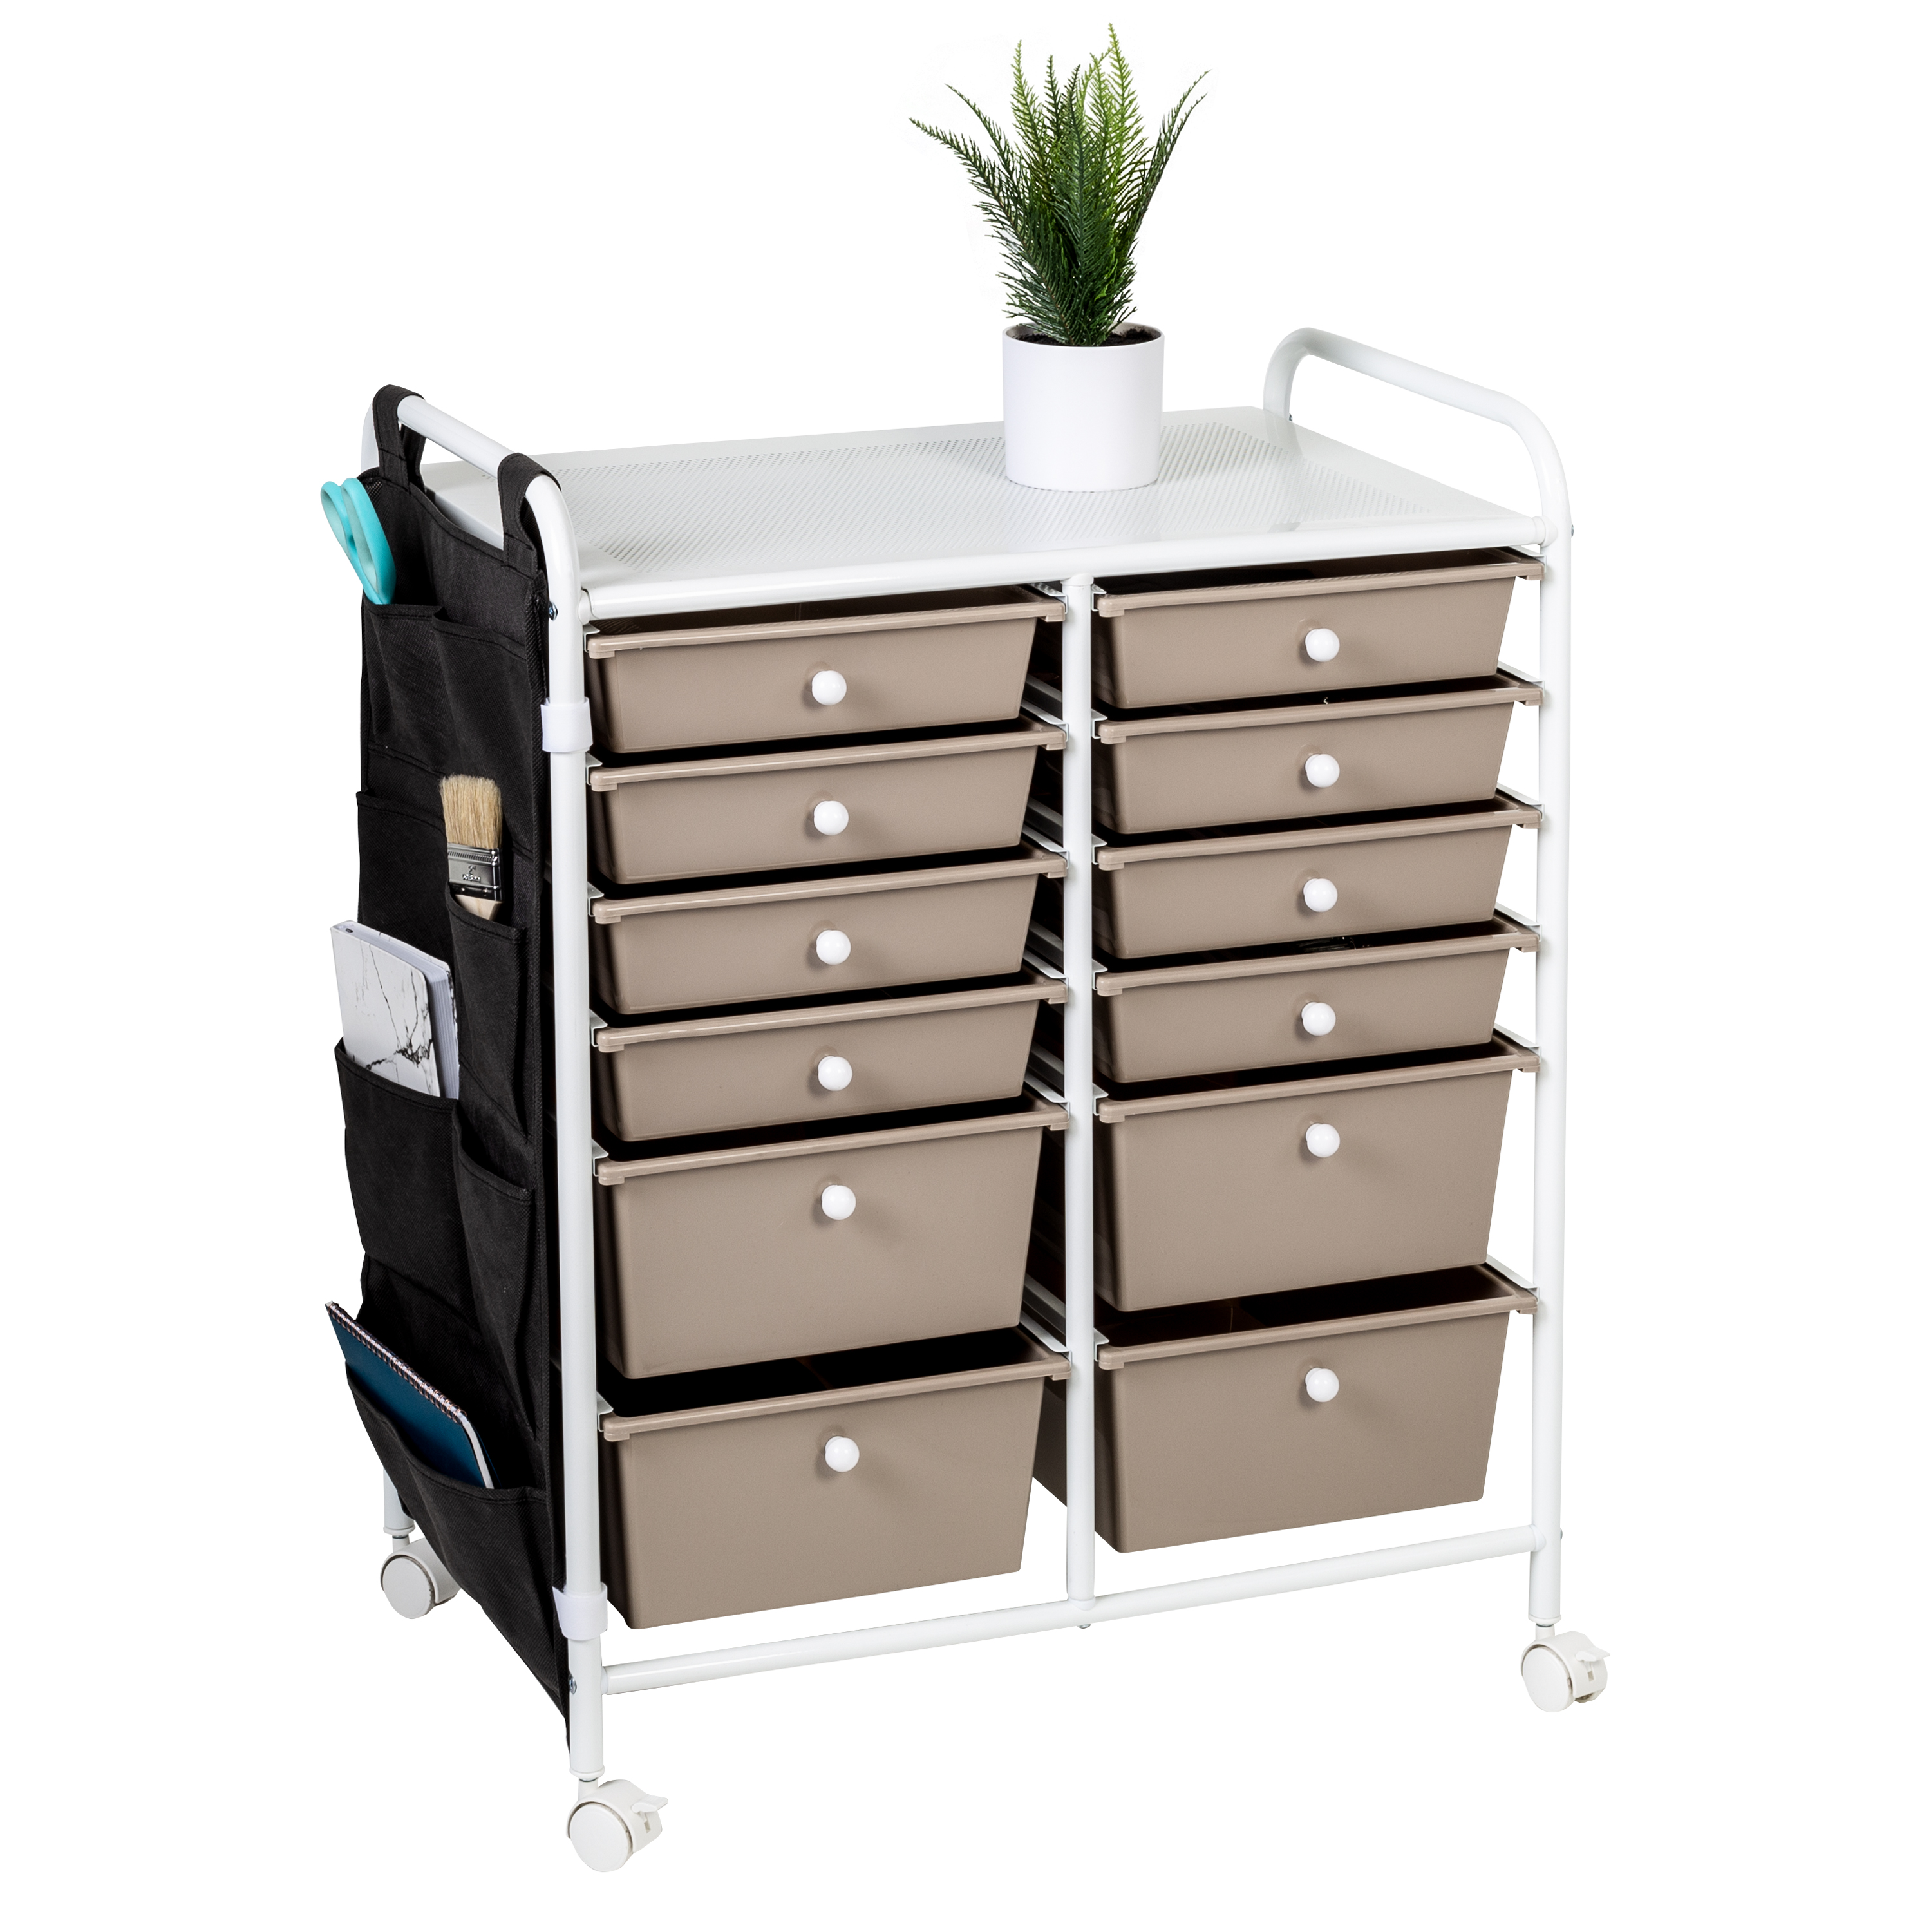 Honey-Can-Do 12-Drawer Metal Rolling Storage Cart with Black Fabric Side Pockets, Beige/White - image 2 of 13